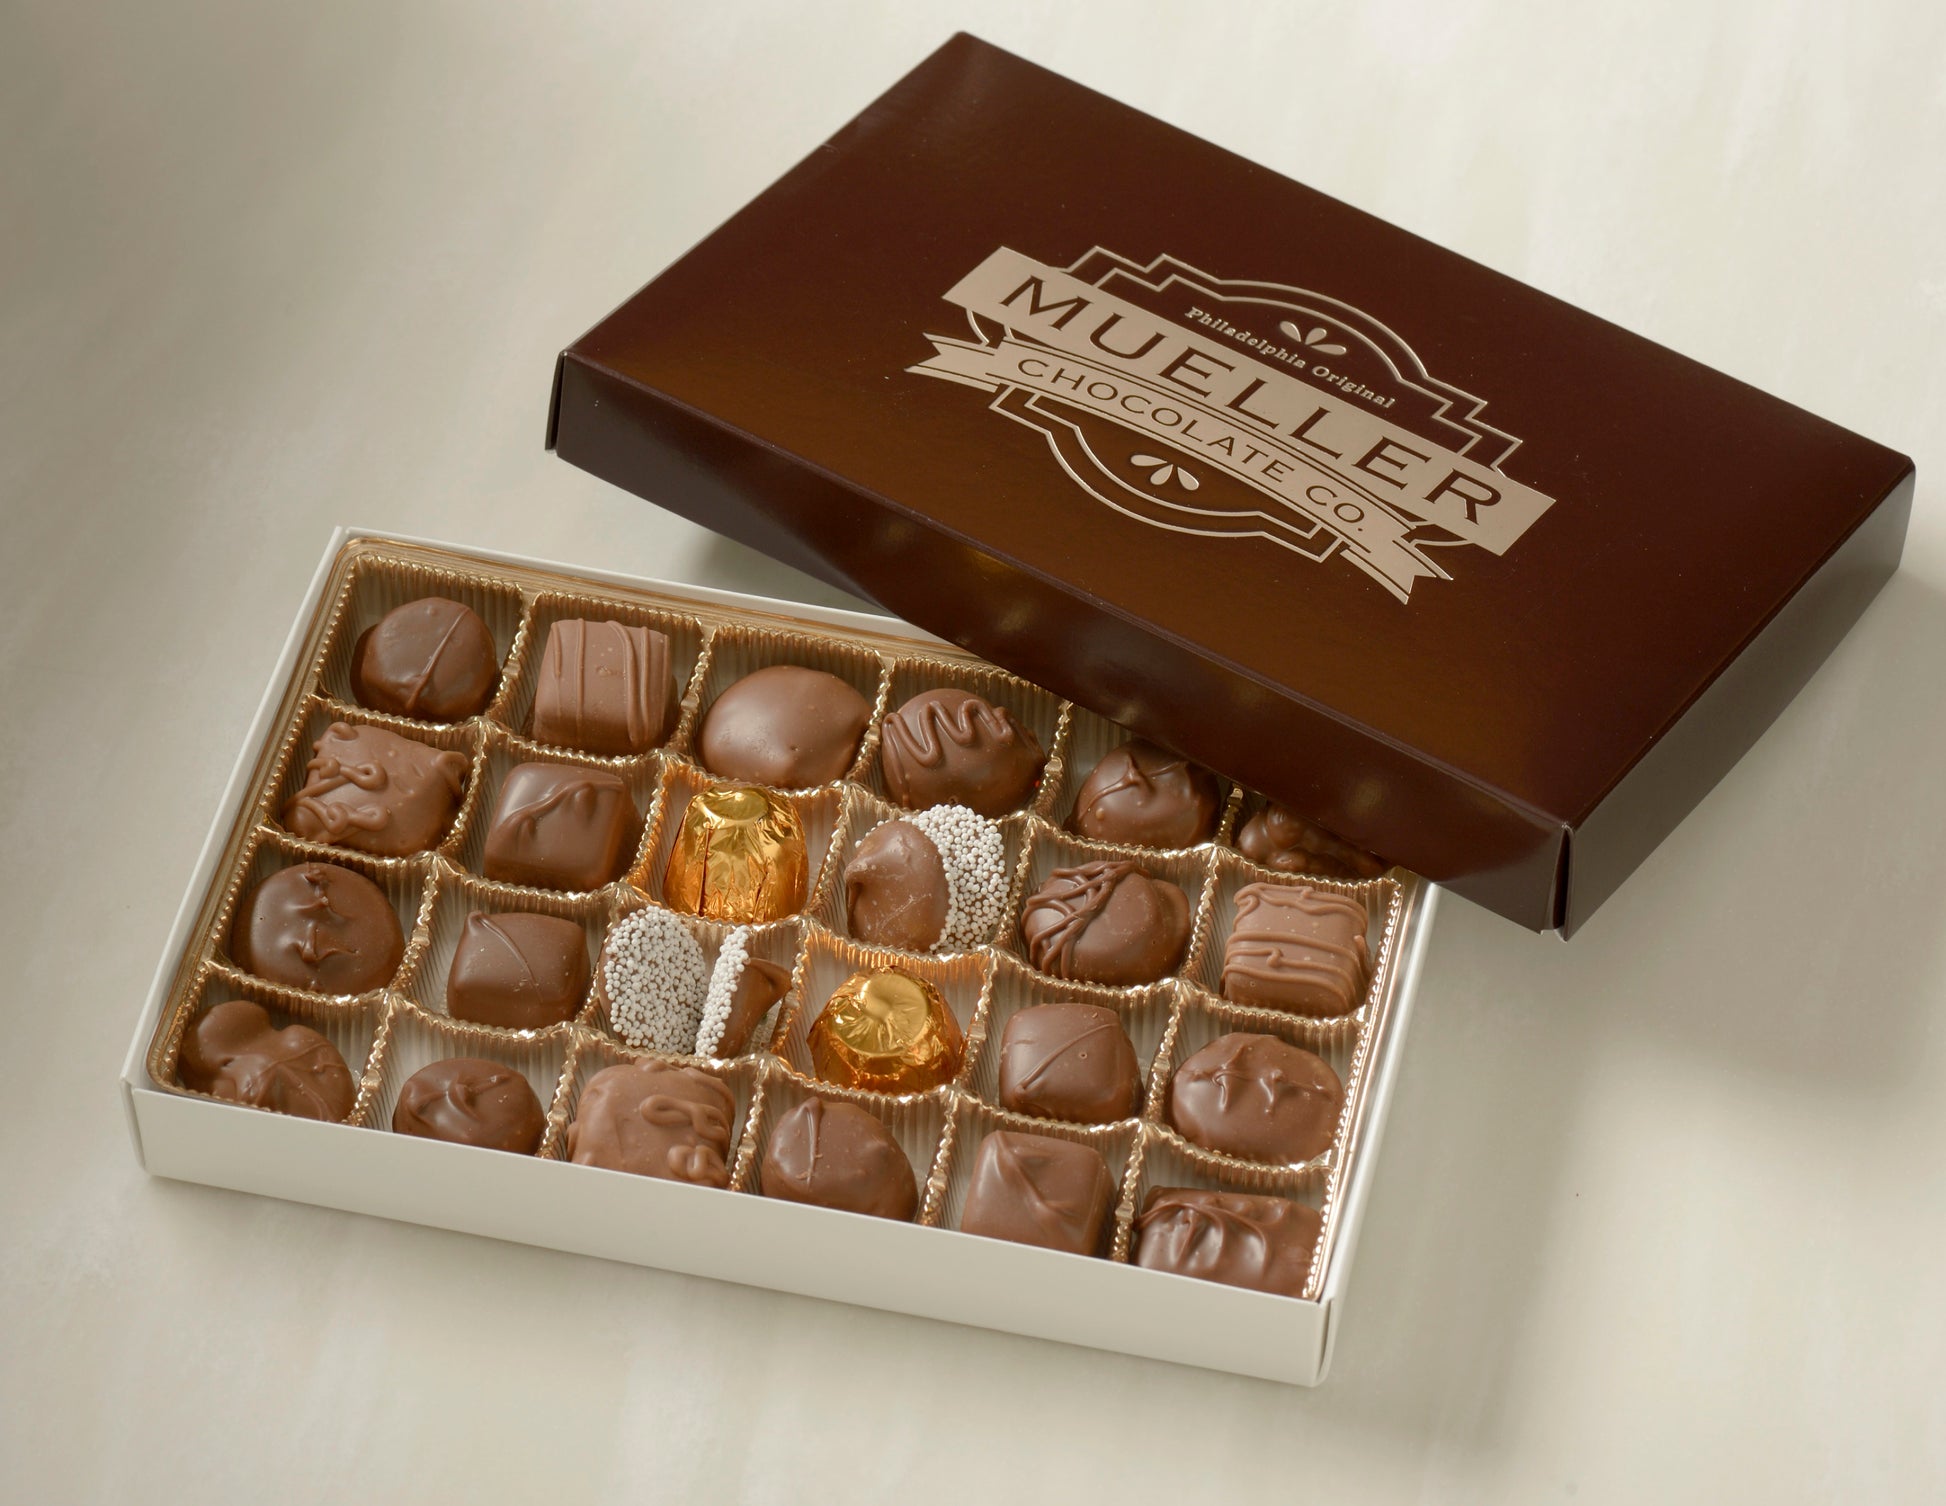 Milk Chocolate Assortment Box - A Delicious Treat for Chocolate Lovers